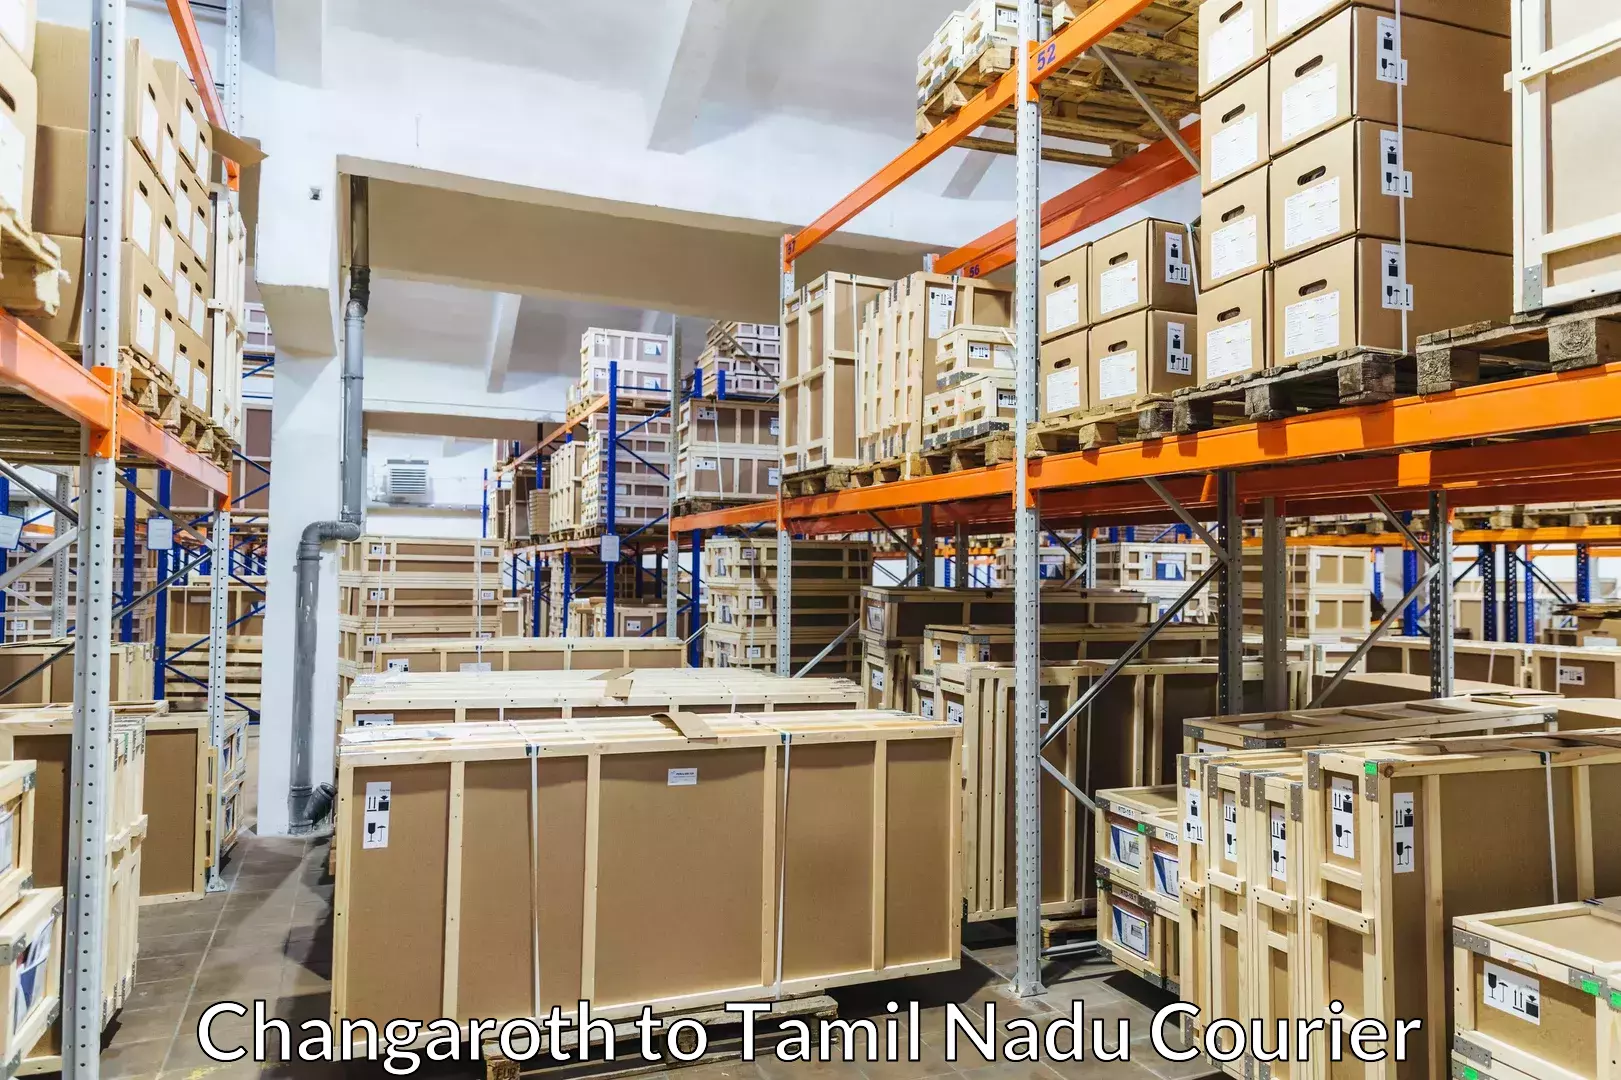 Cost-effective moving options in Changaroth to Viluppuram